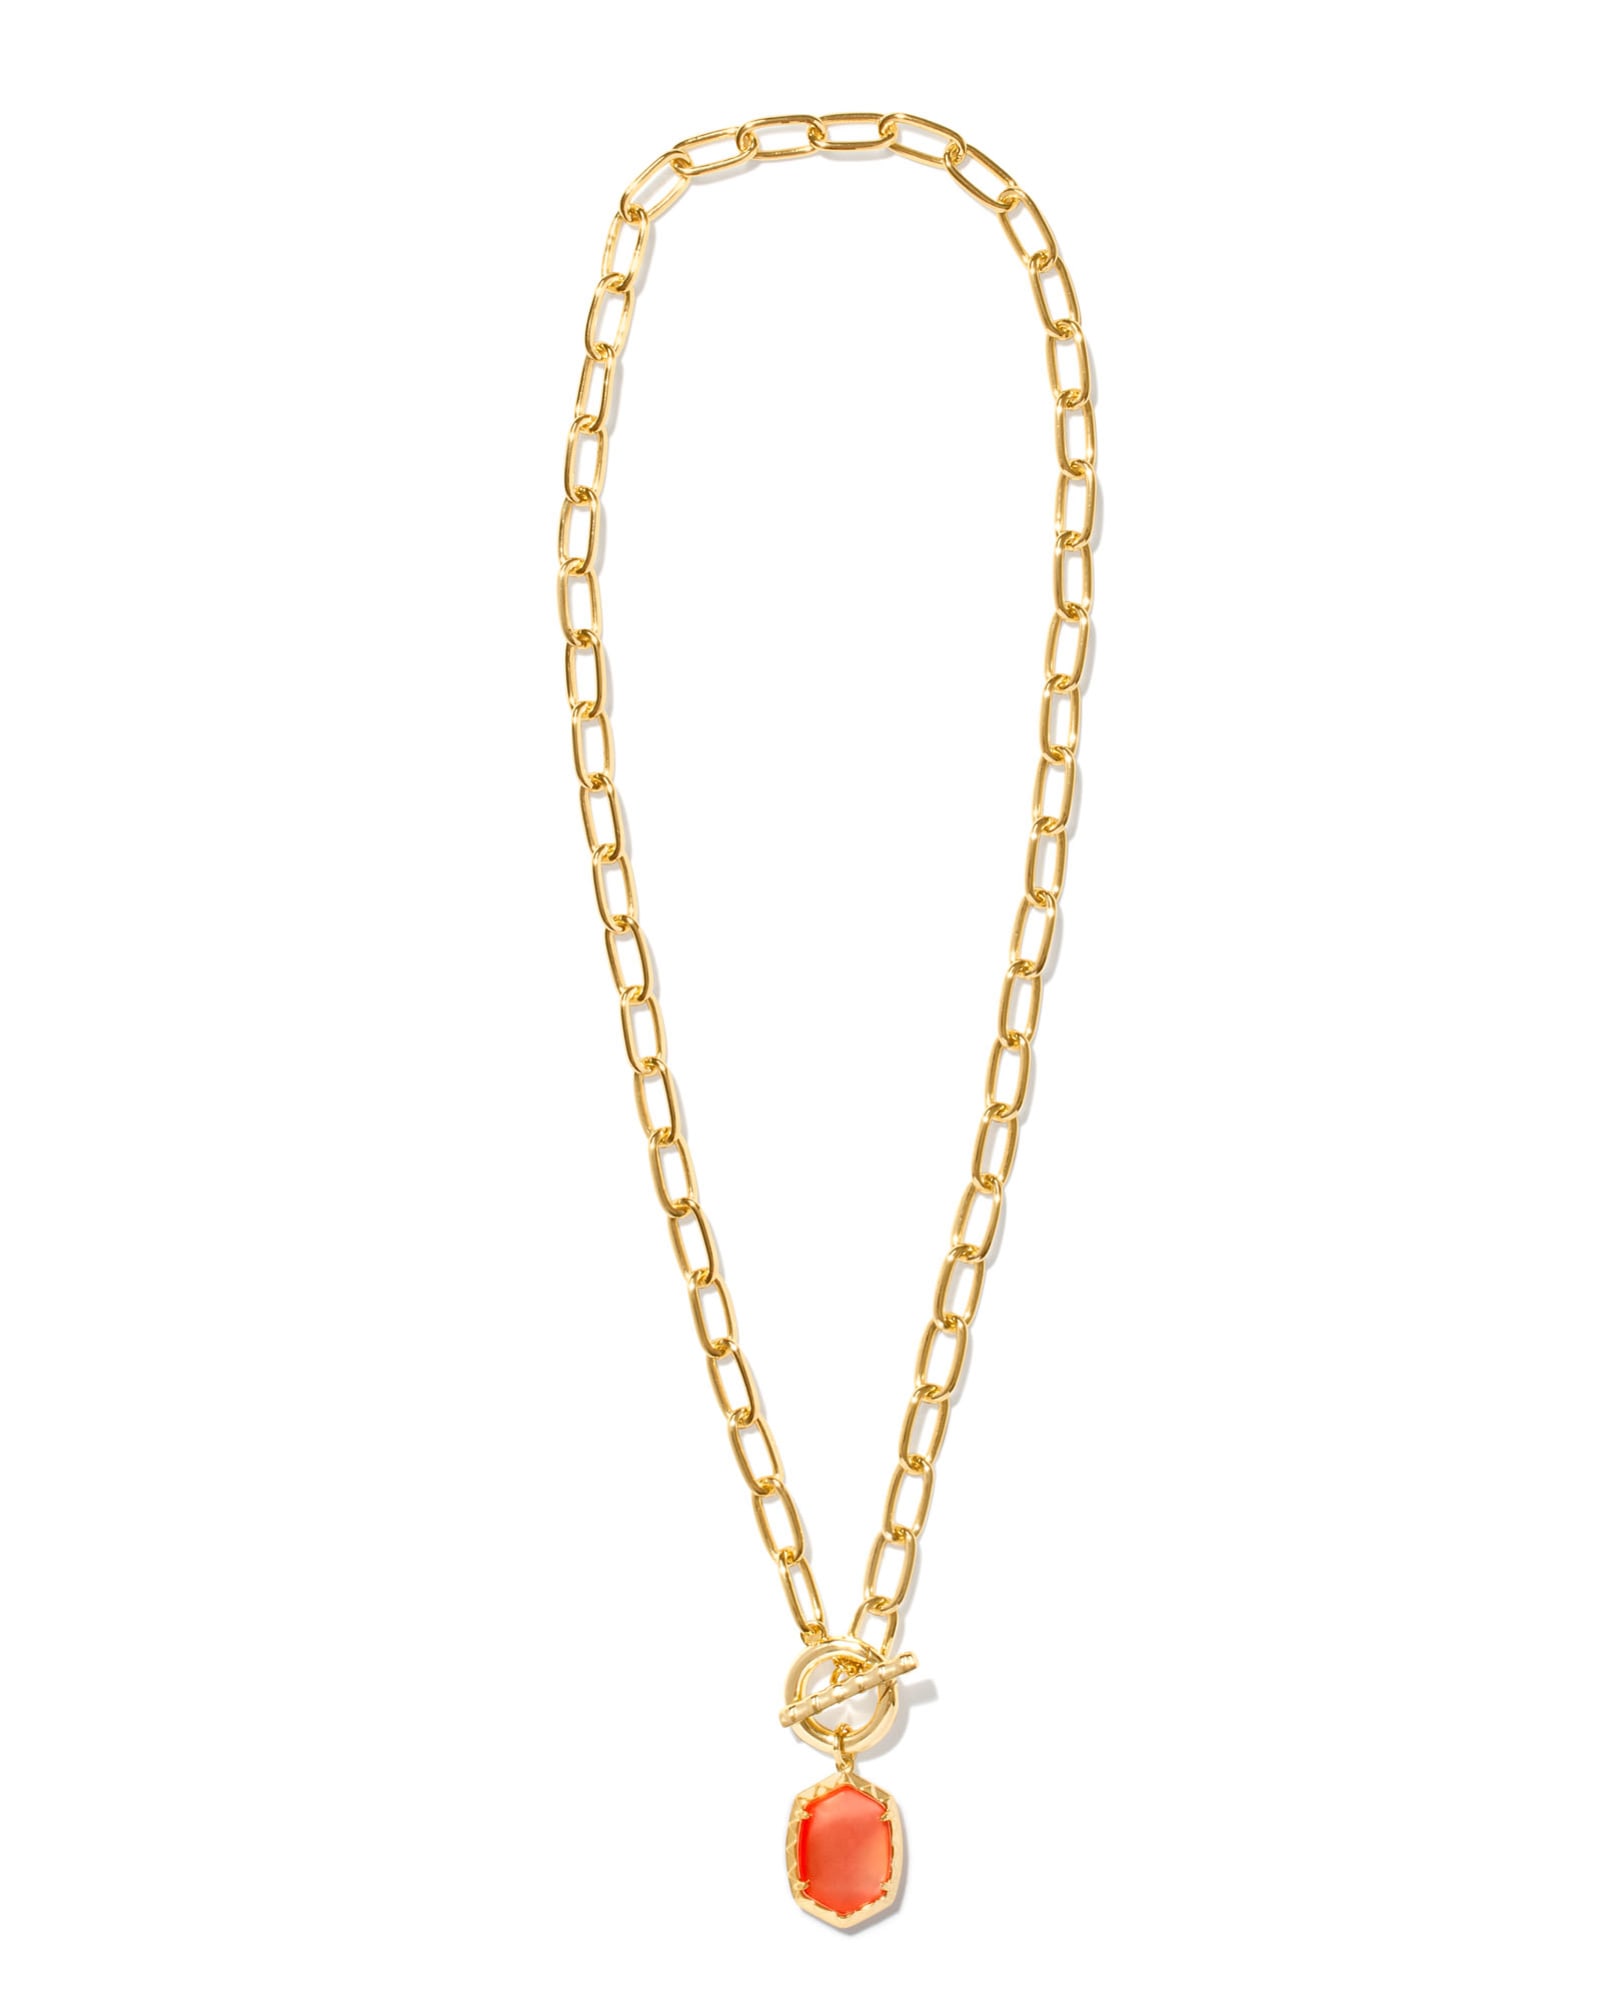 Daphne Convertible Gold Link and Chain Necklace in Coral Pink Mother-of-Pearl